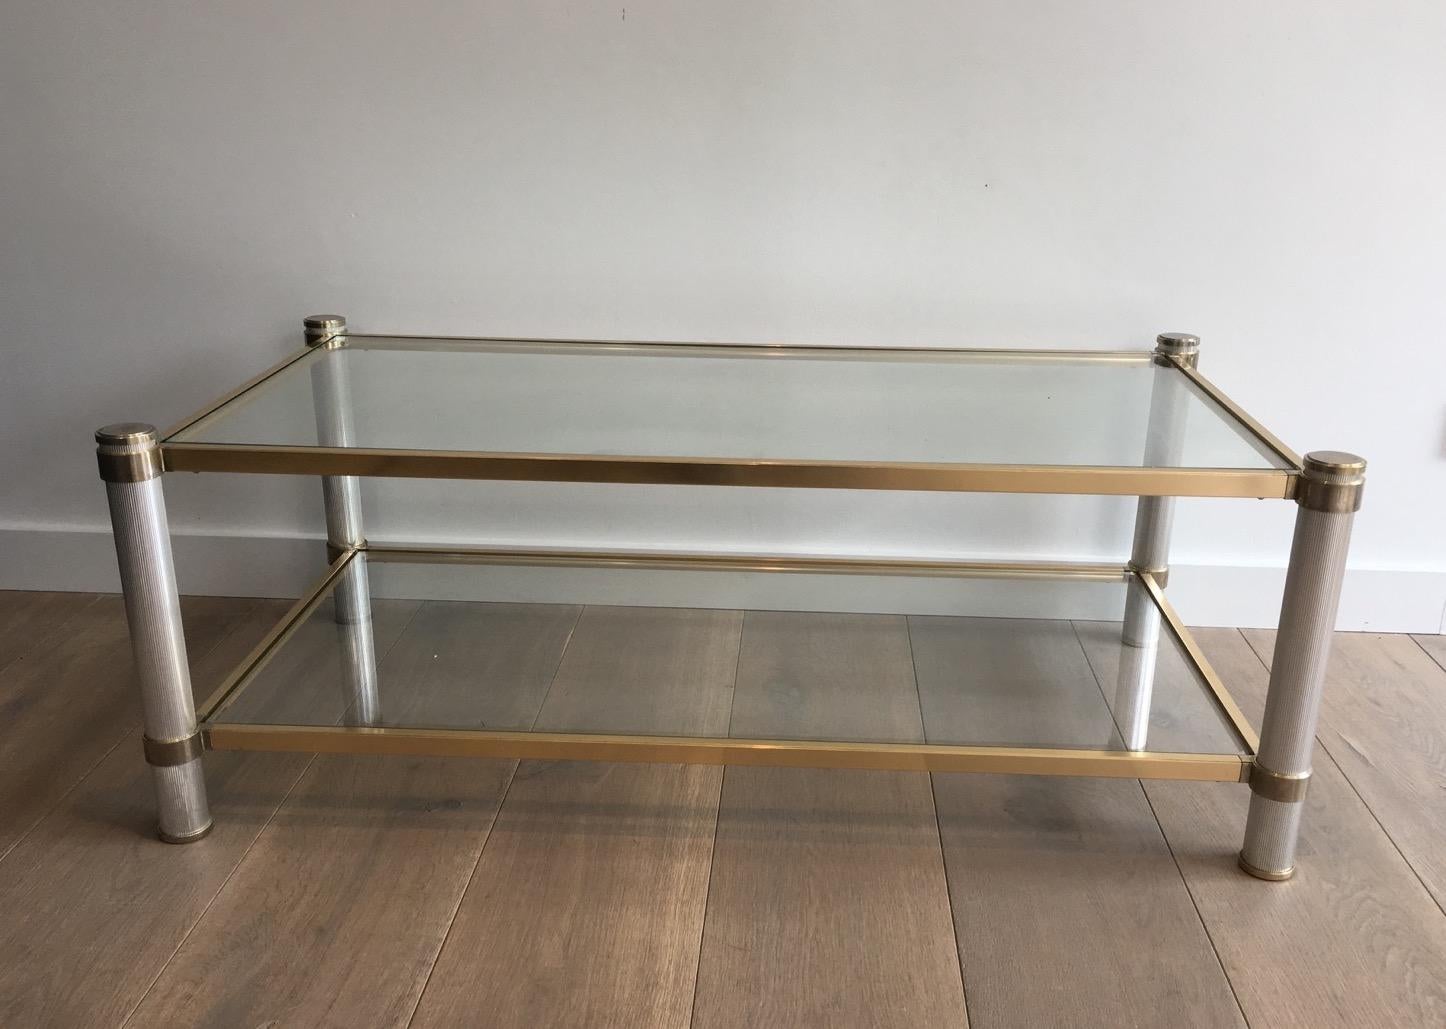  Gold Gilt and Silver Color Aluminium Coffee table with Fluted Legs by P. Vandel For Sale 12